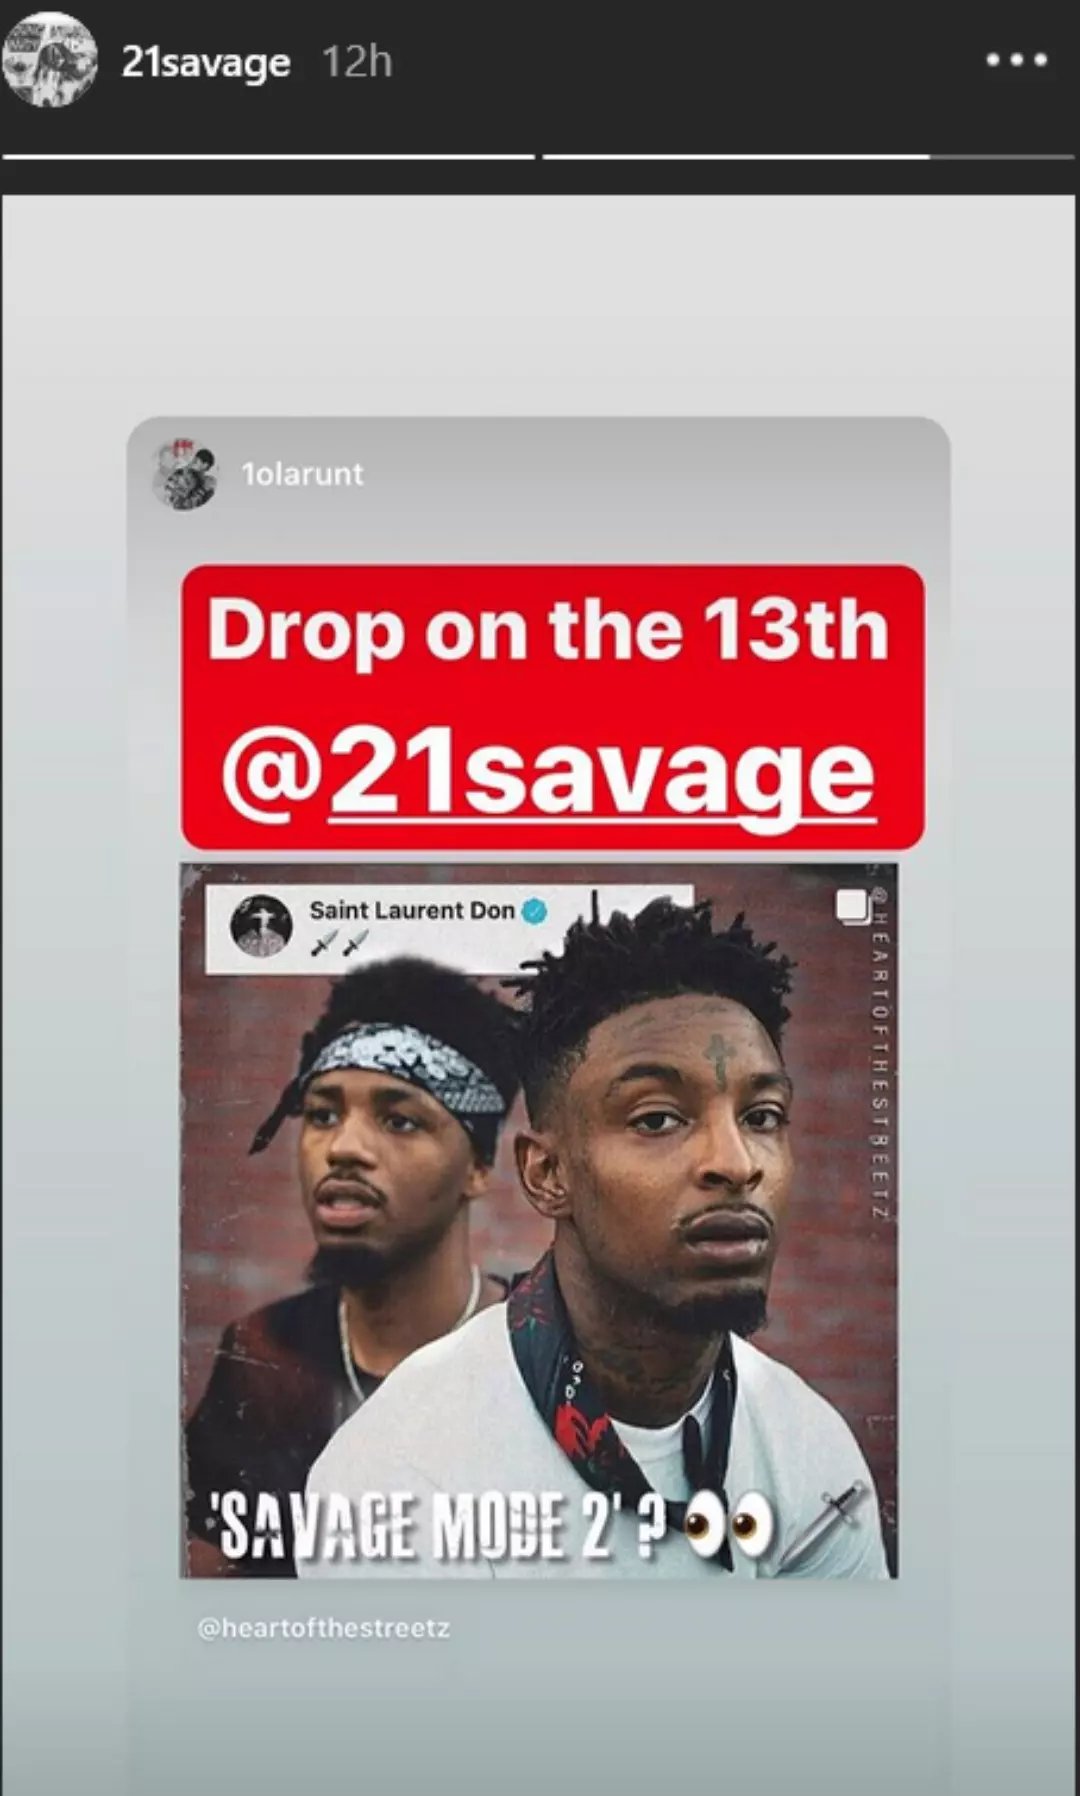 Metro Boomin and 21 Savage say Savage Mode 2 is coming